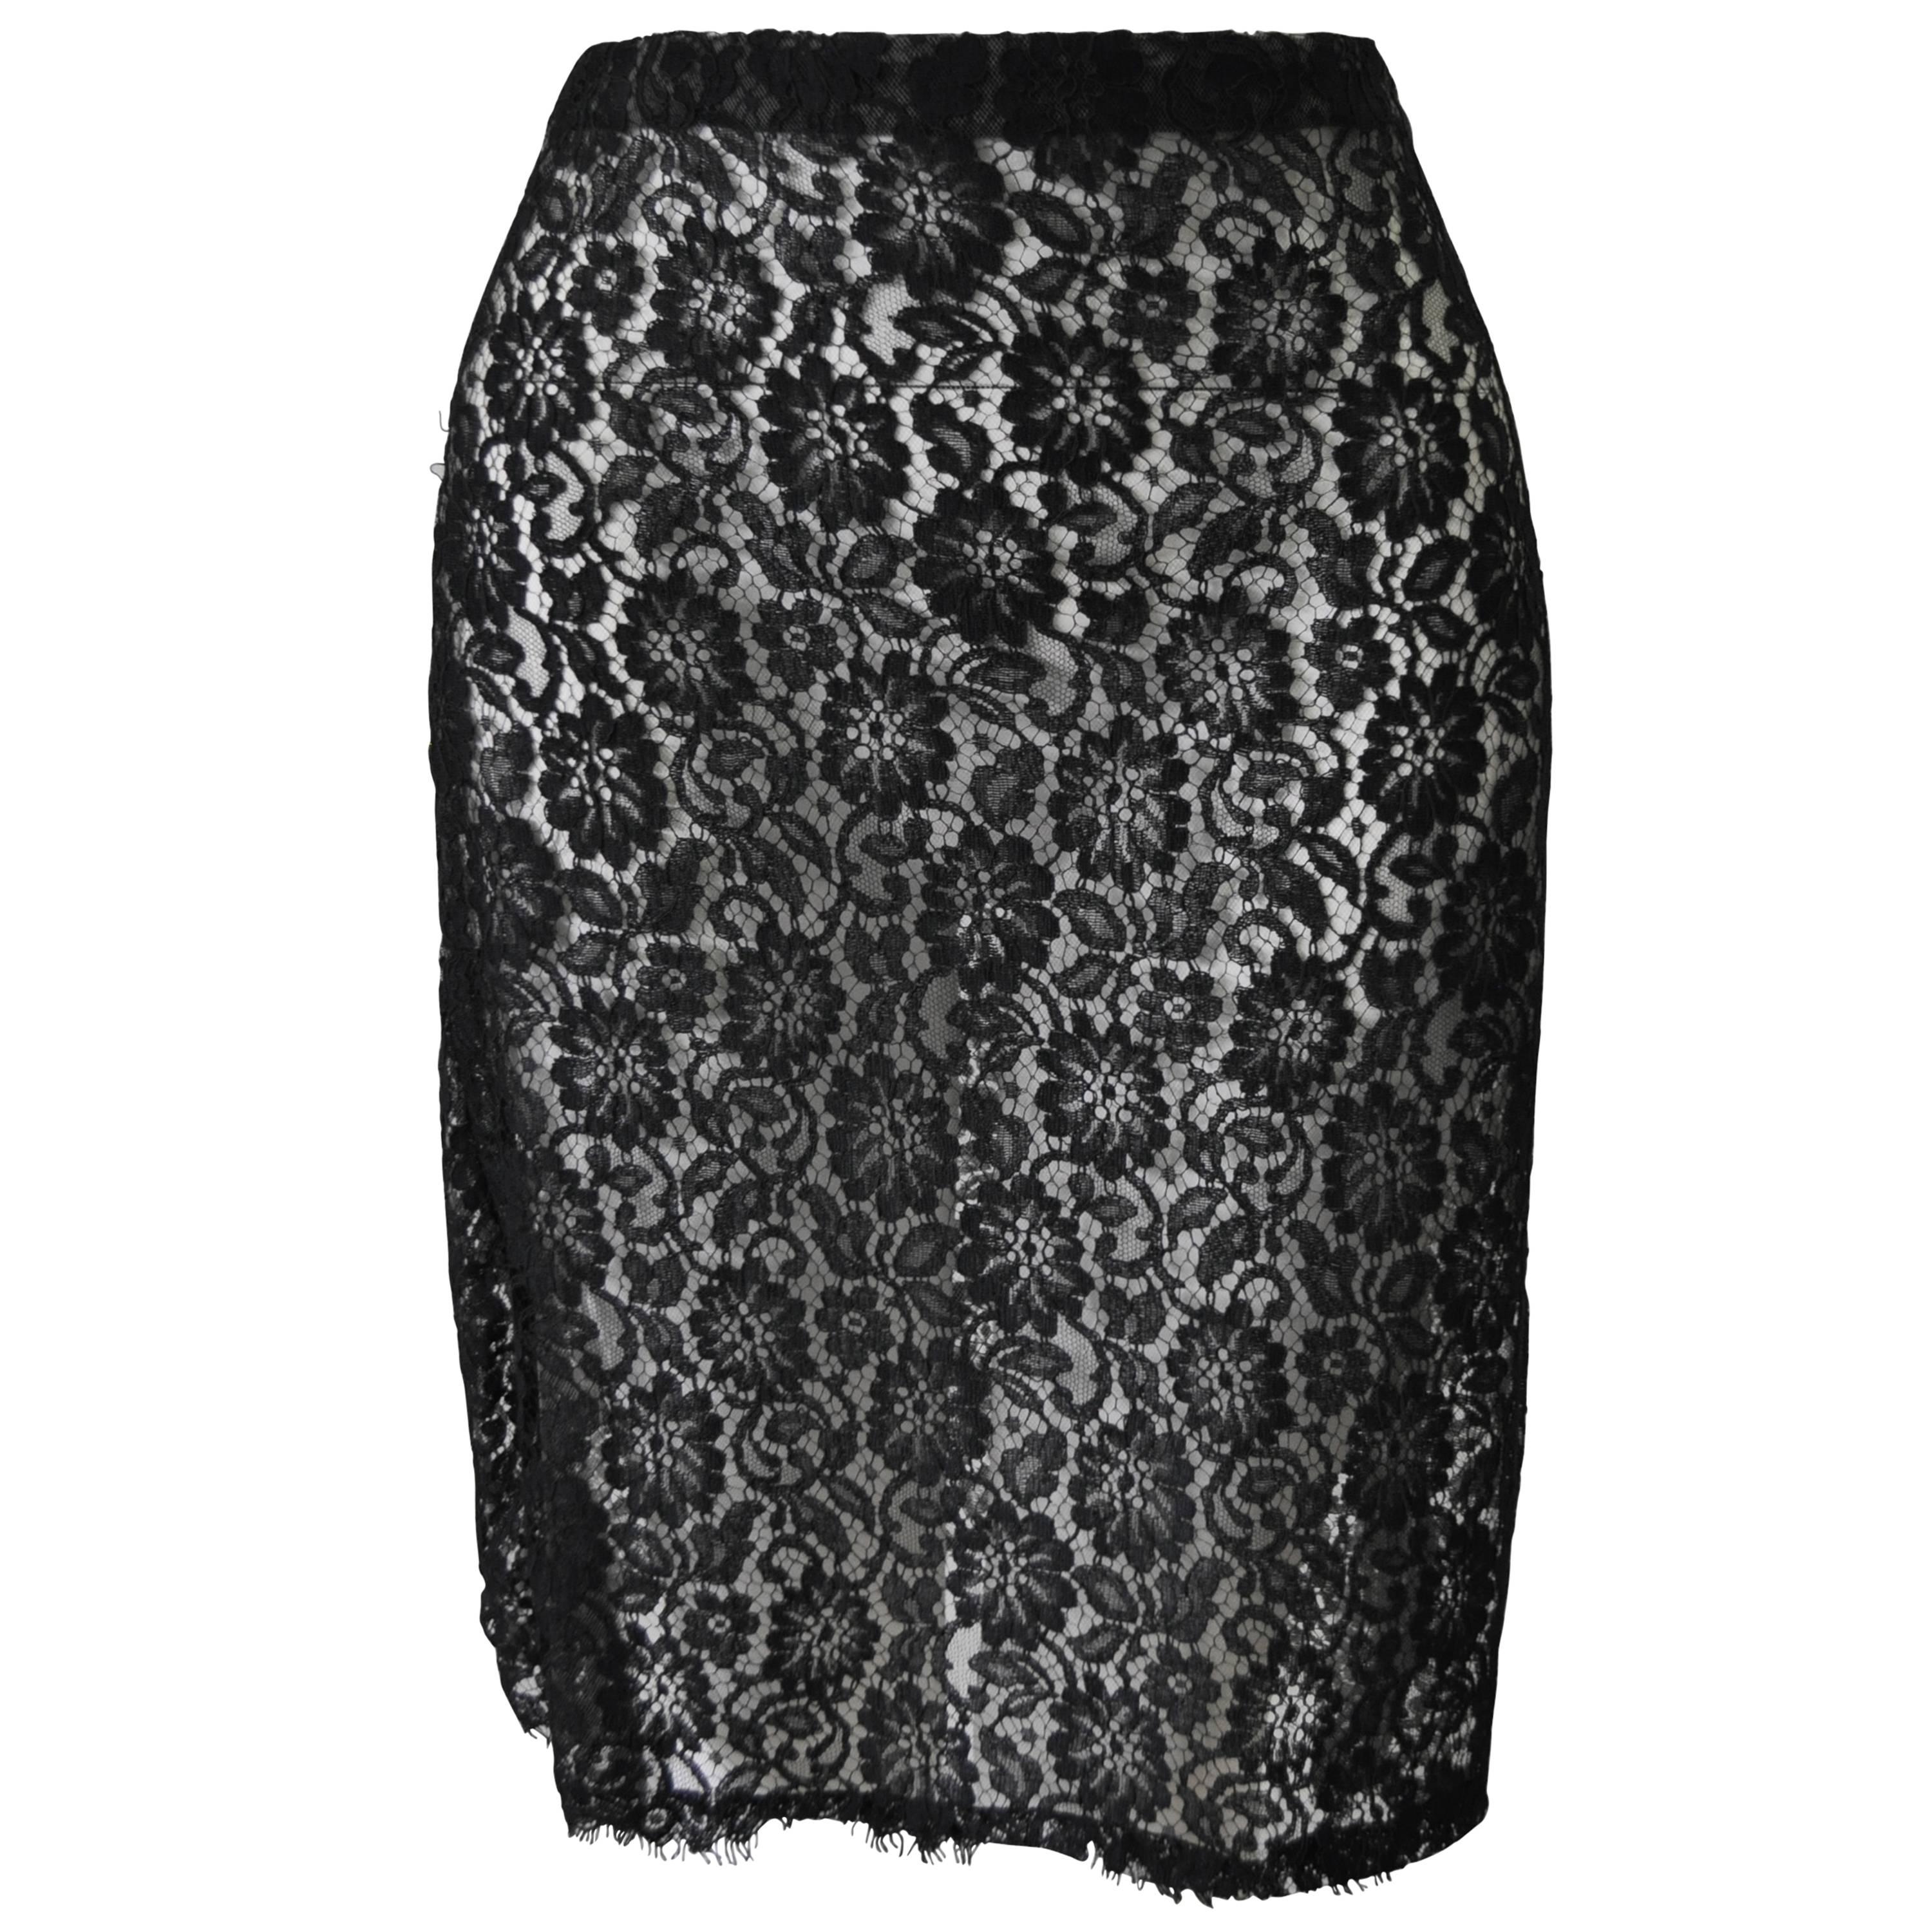 Unique Gianni Versace Istante Black Lace over White Lining Skirt For Sale